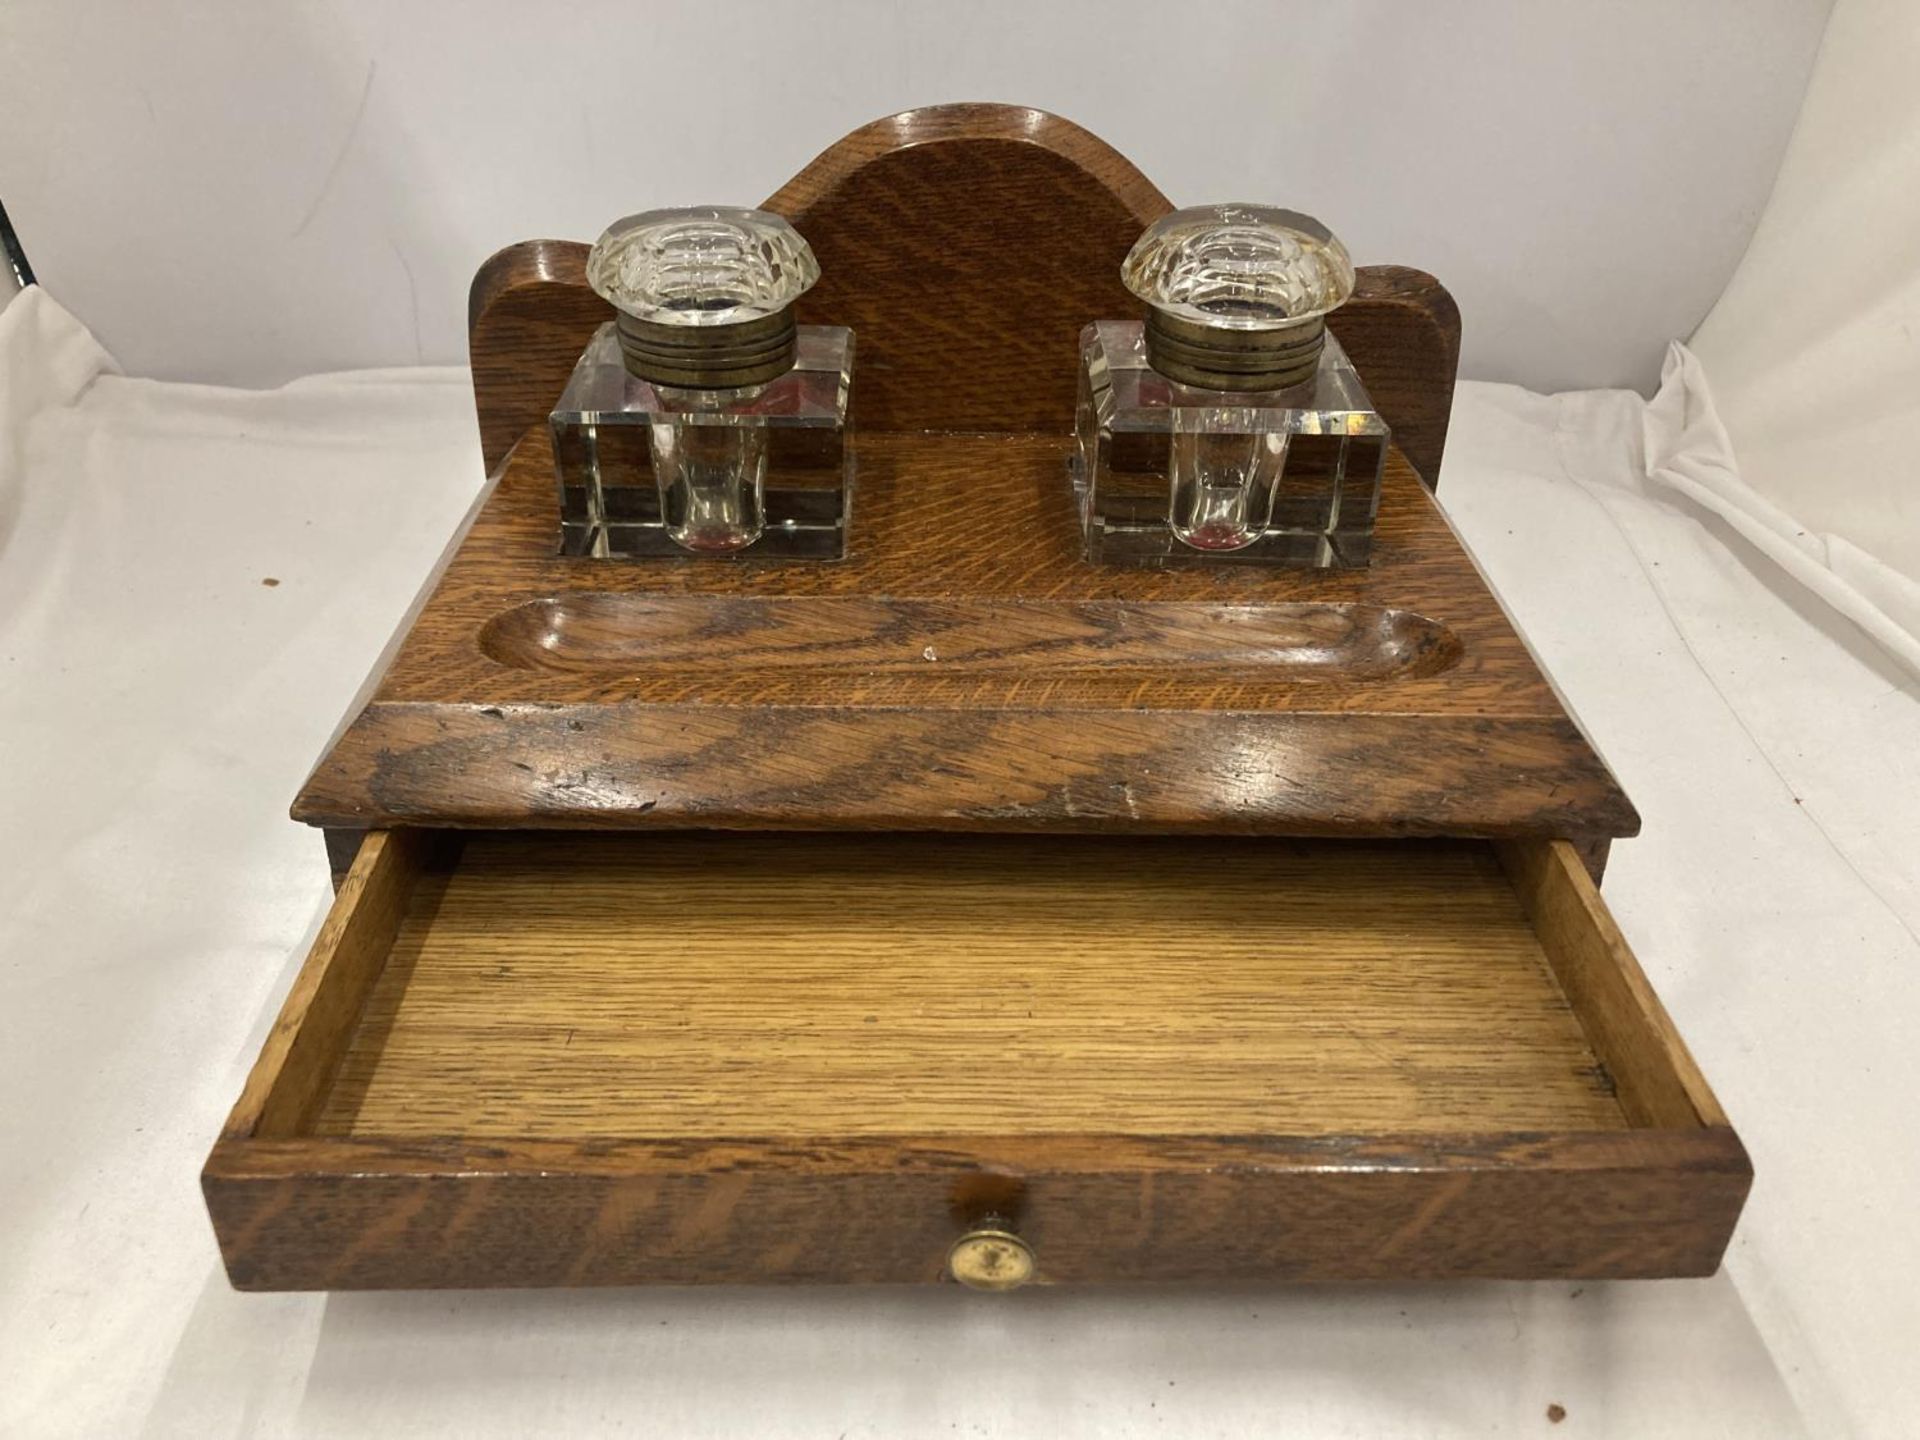 A DESK SET WITH LOWER DRAWER AND TWO ORIGINAL GLASS BOTTLES - Image 2 of 5